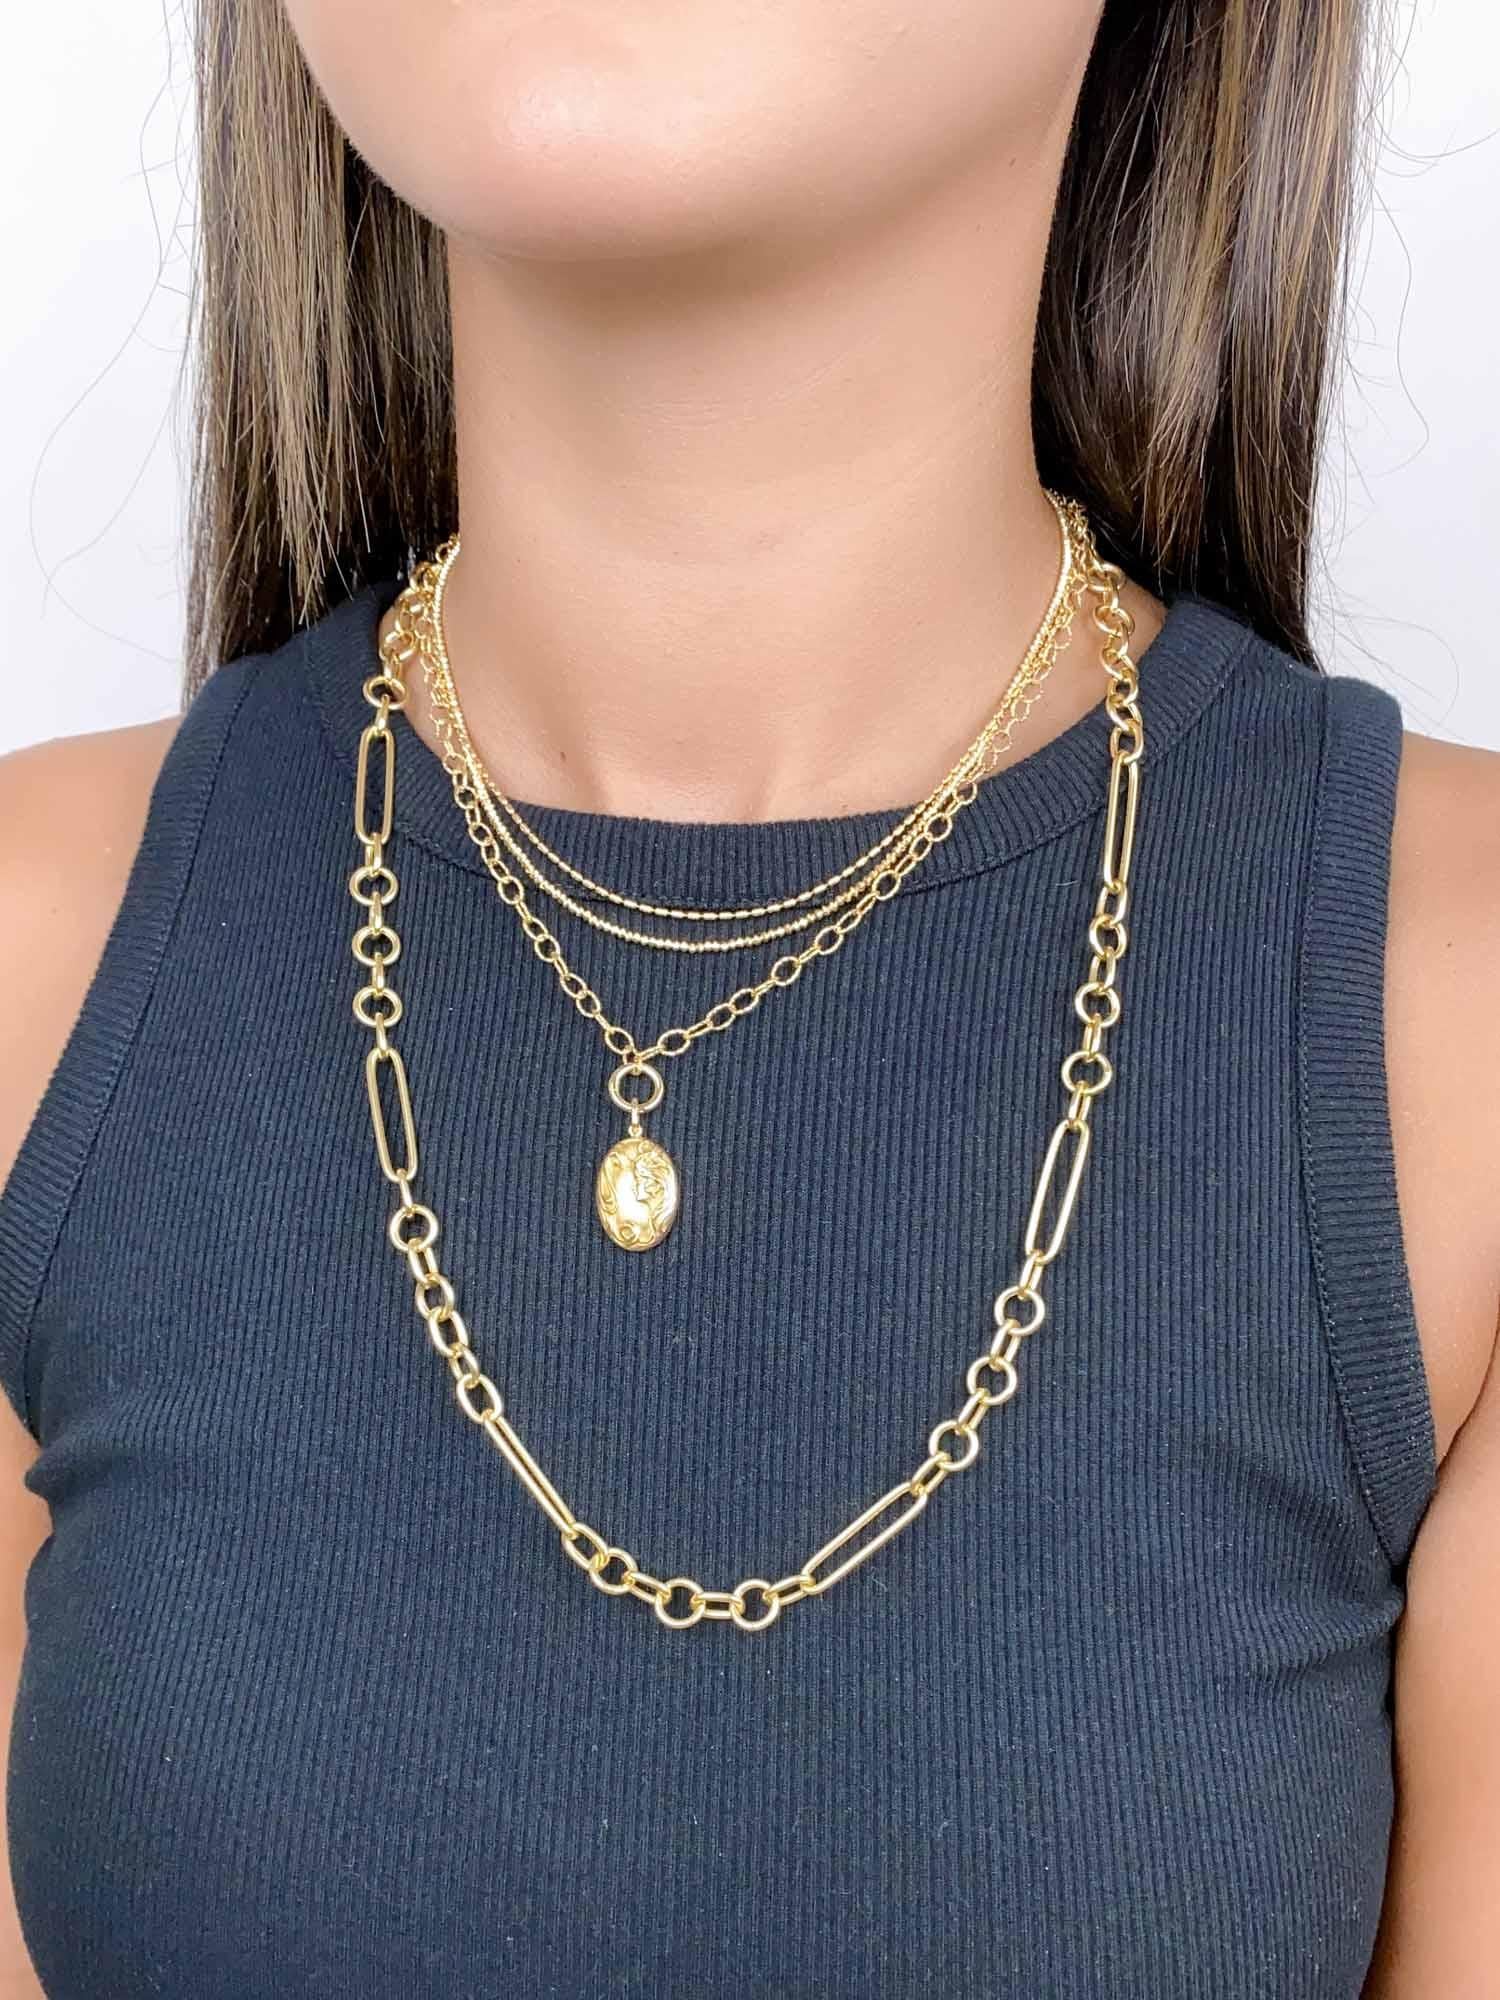 14K Gold Mixed Link Chain Necklace 18